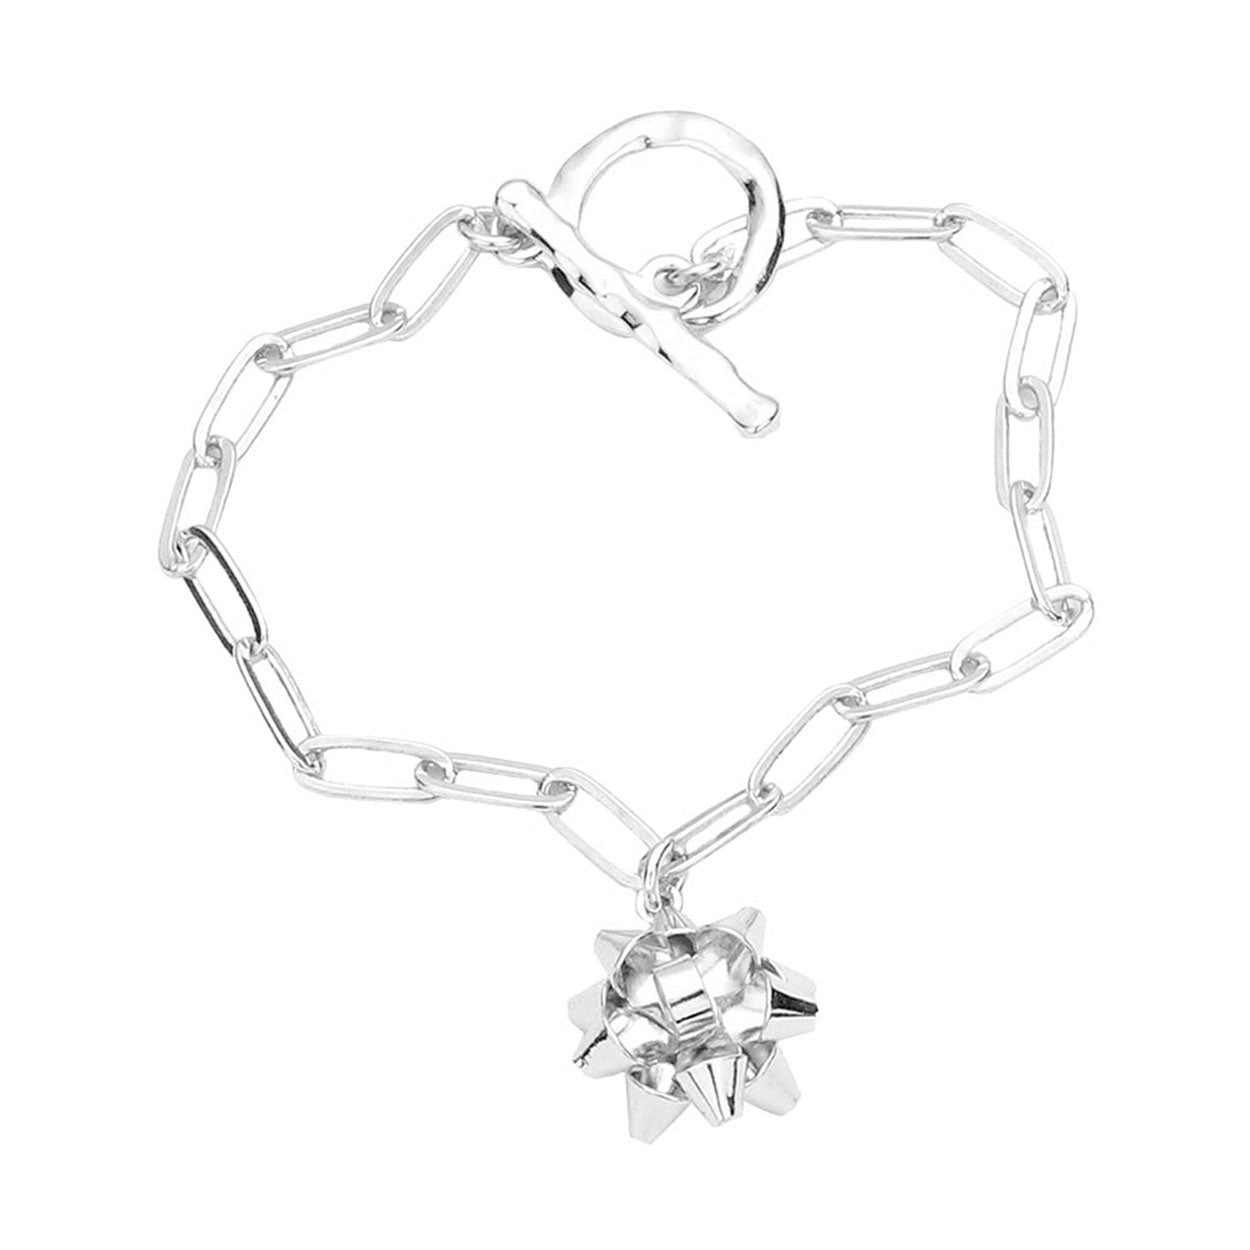 Rhodium Metal Christmas Bow Charm Toggle Bracelet, Get ready with these Magnetic Bracelet, put on a pop of color to complete your ensemble. Perfect for adding just the right amount of shimmer & shine and a touch of class to special events. Perfect Birthday Gift, Anniversary Gift, Mother's Day Gift, Graduation Gift.